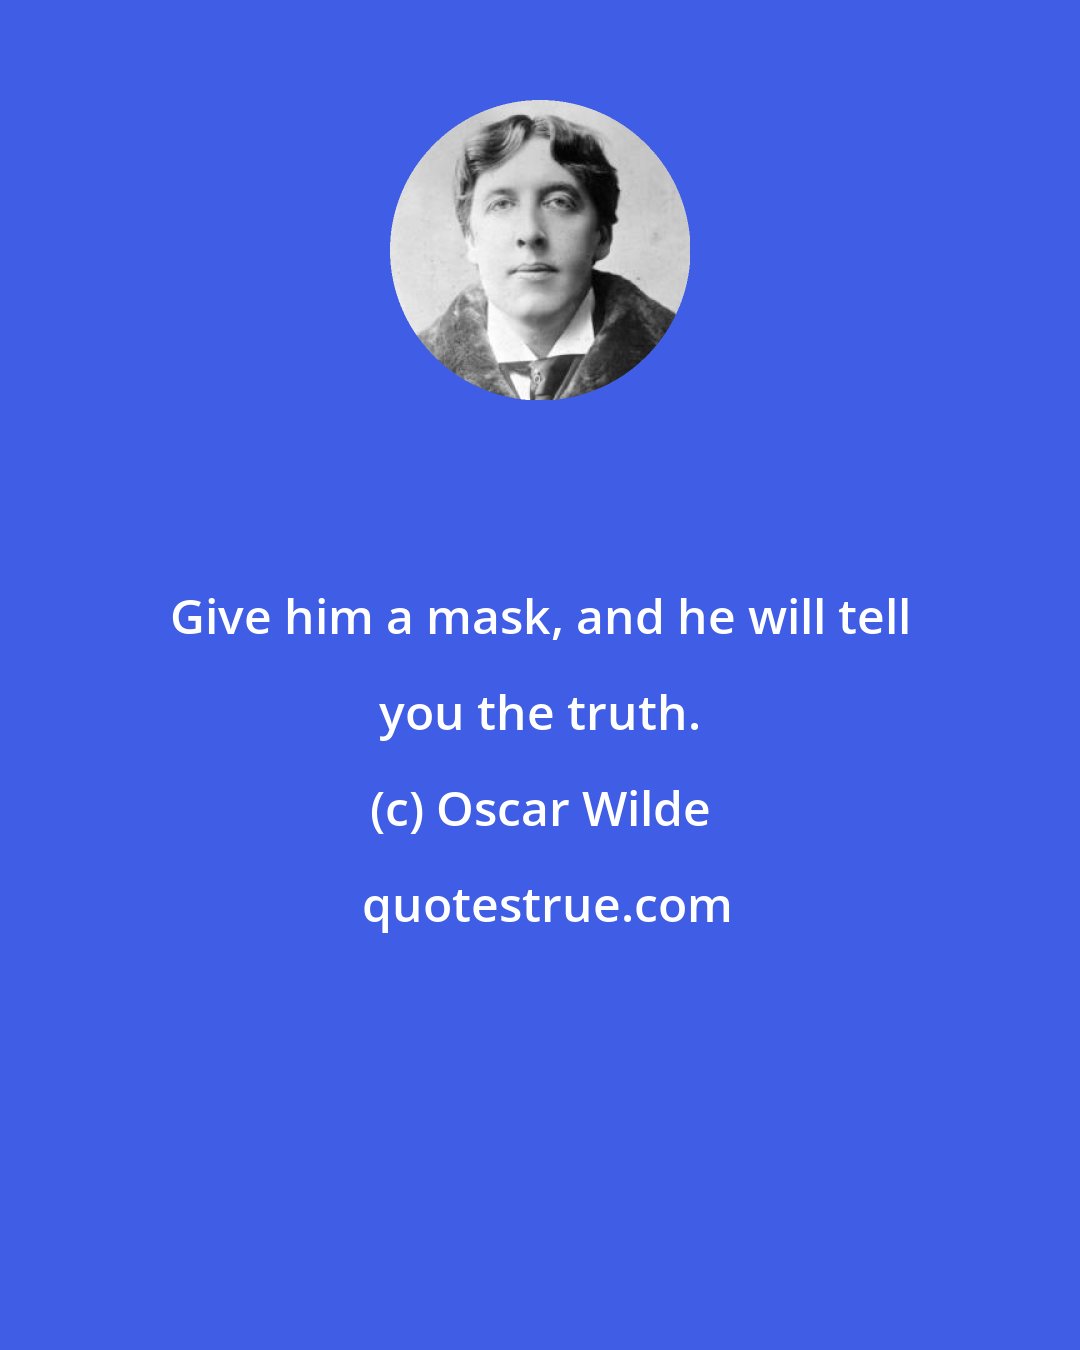 Oscar Wilde: Give him a mask, and he will tell you the truth.